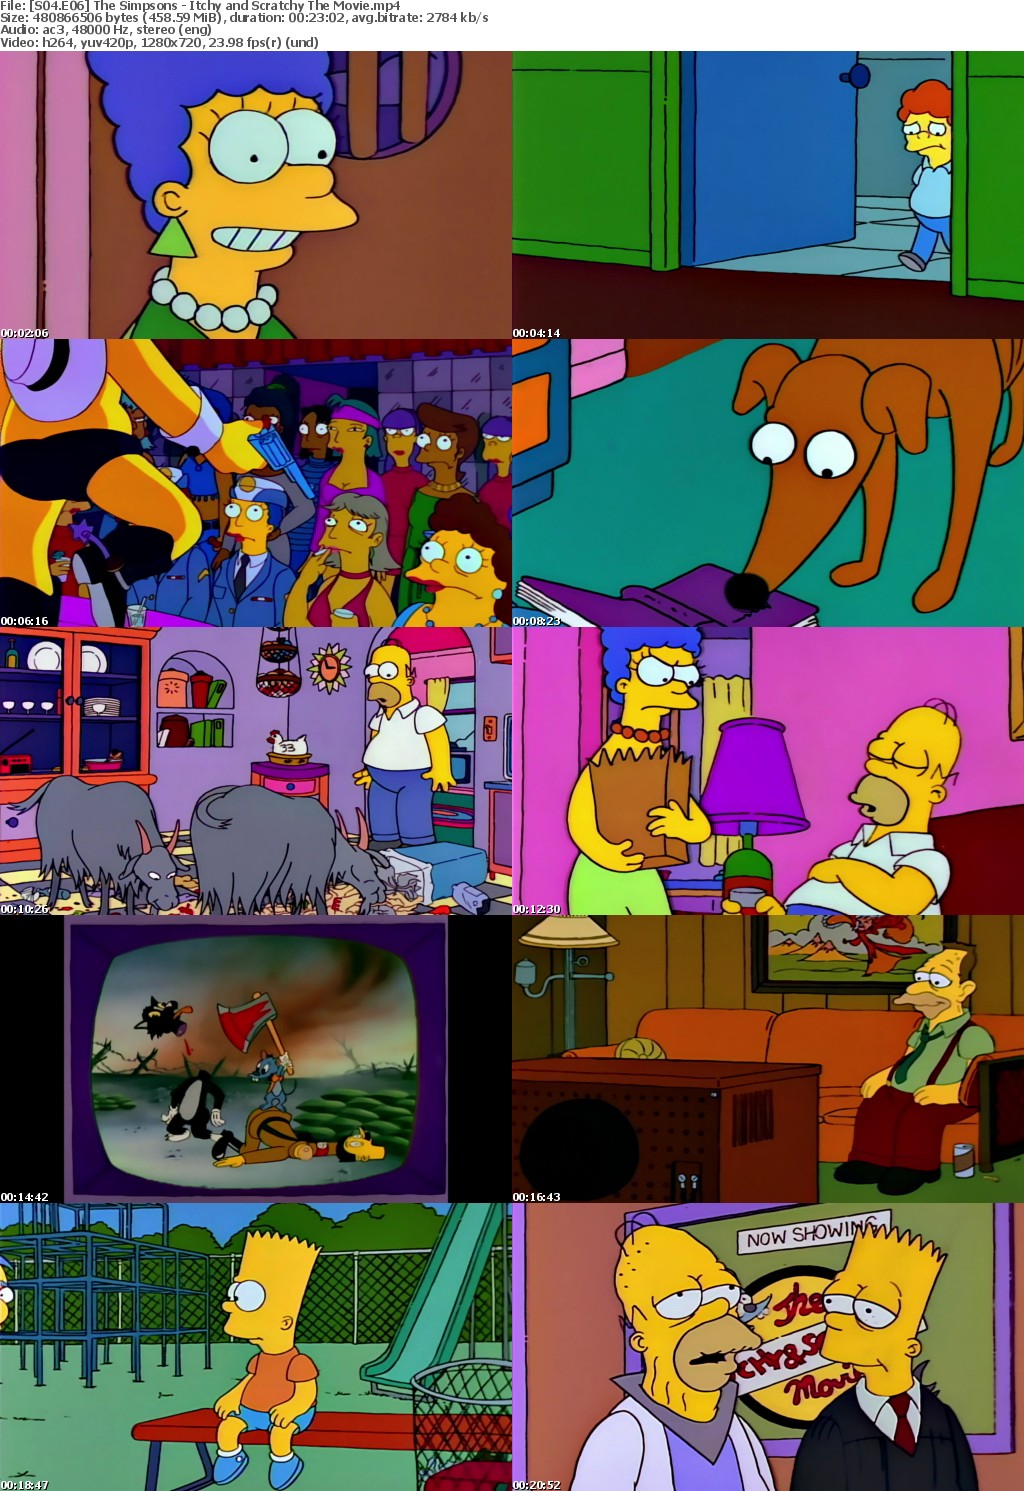 The Simpsons S4 E6 Itchy and Scratchy The Movie MP4 720p H264 WEBRip EzzRips